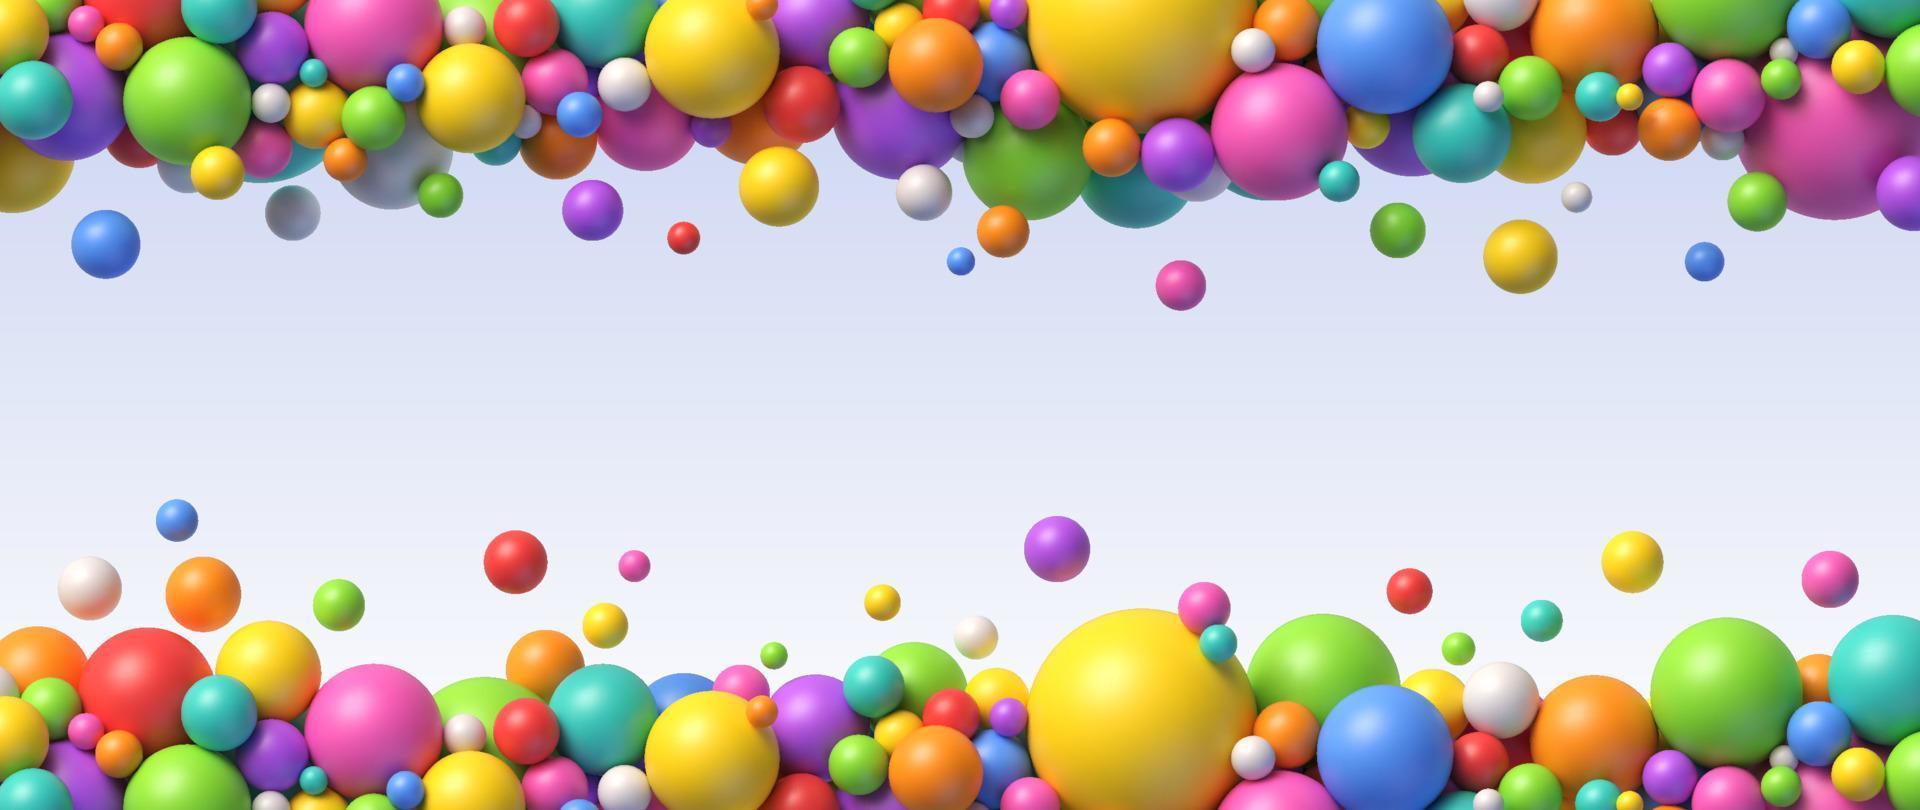 Multicolored flying balls arranged in two lines. Abstract composition with colorful balls in different sizes with empty space for your content.. Realistic vector background